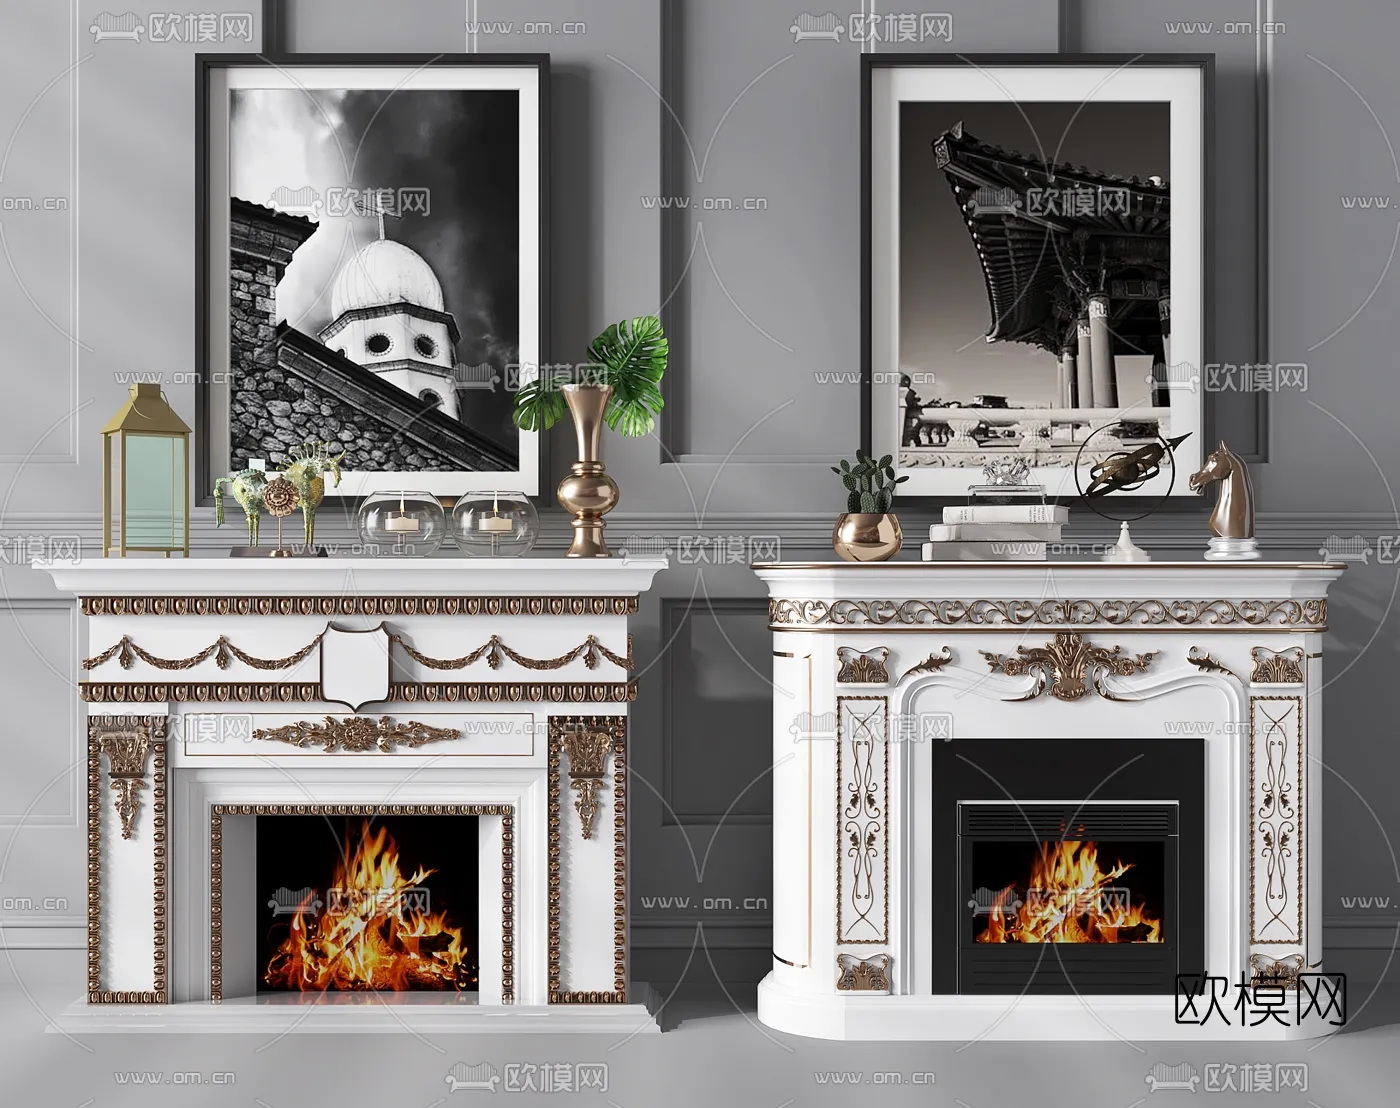 CLASSIC – FIREPLACE 3DMODELS – 006